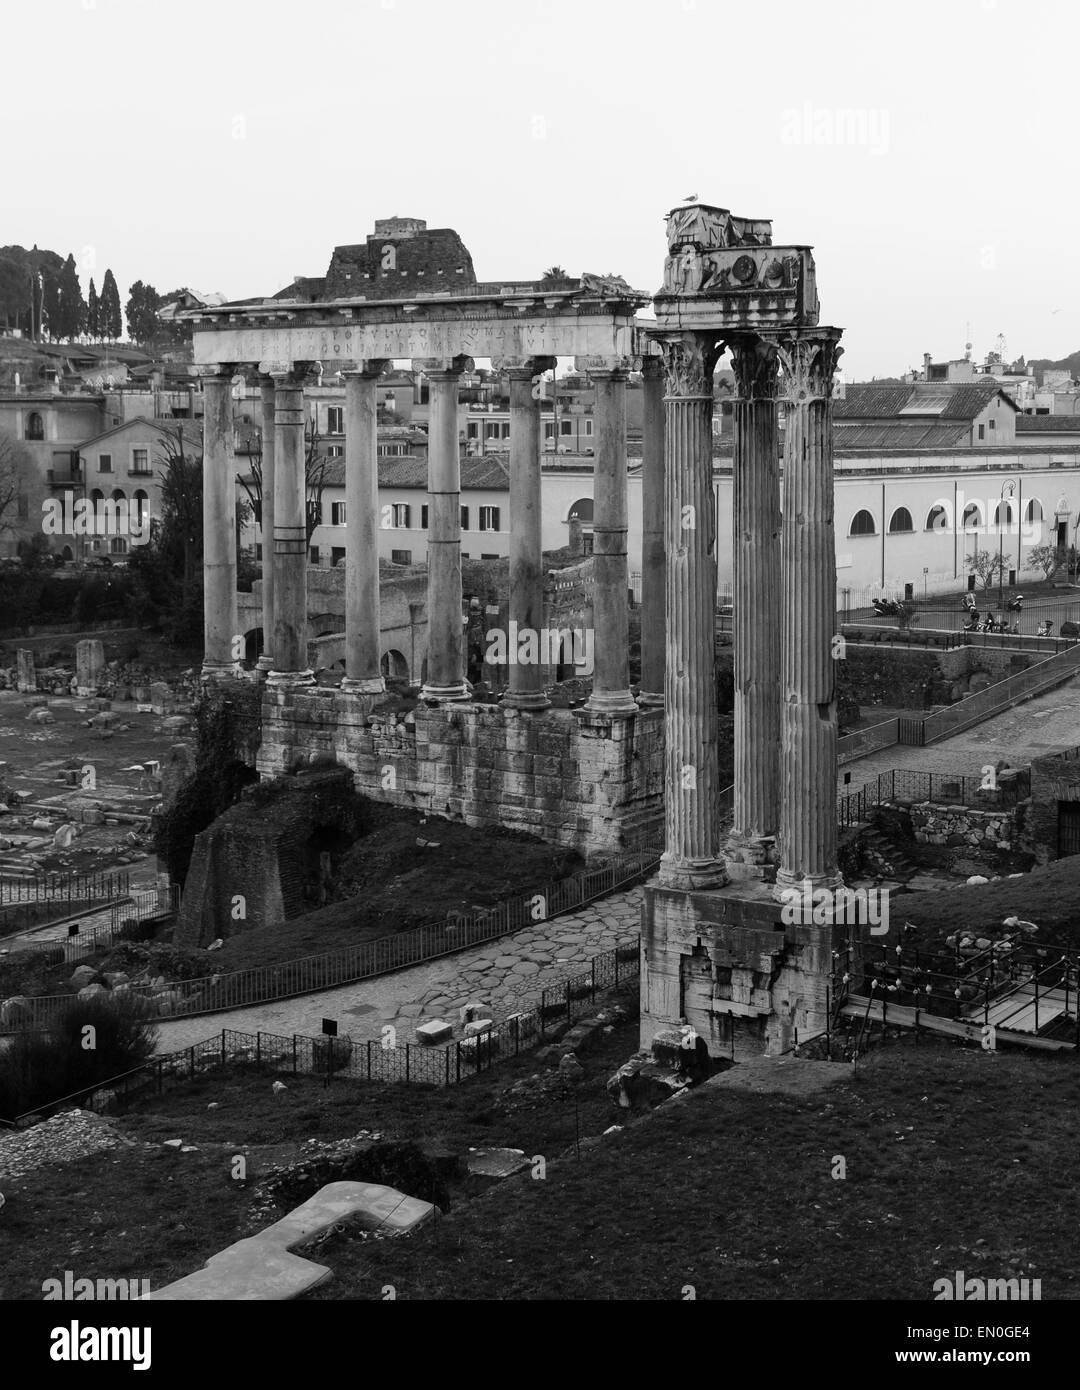 Part of the Temple of Saturn and Temple of Vespasian and Titus ruins in Rome Stock Photo